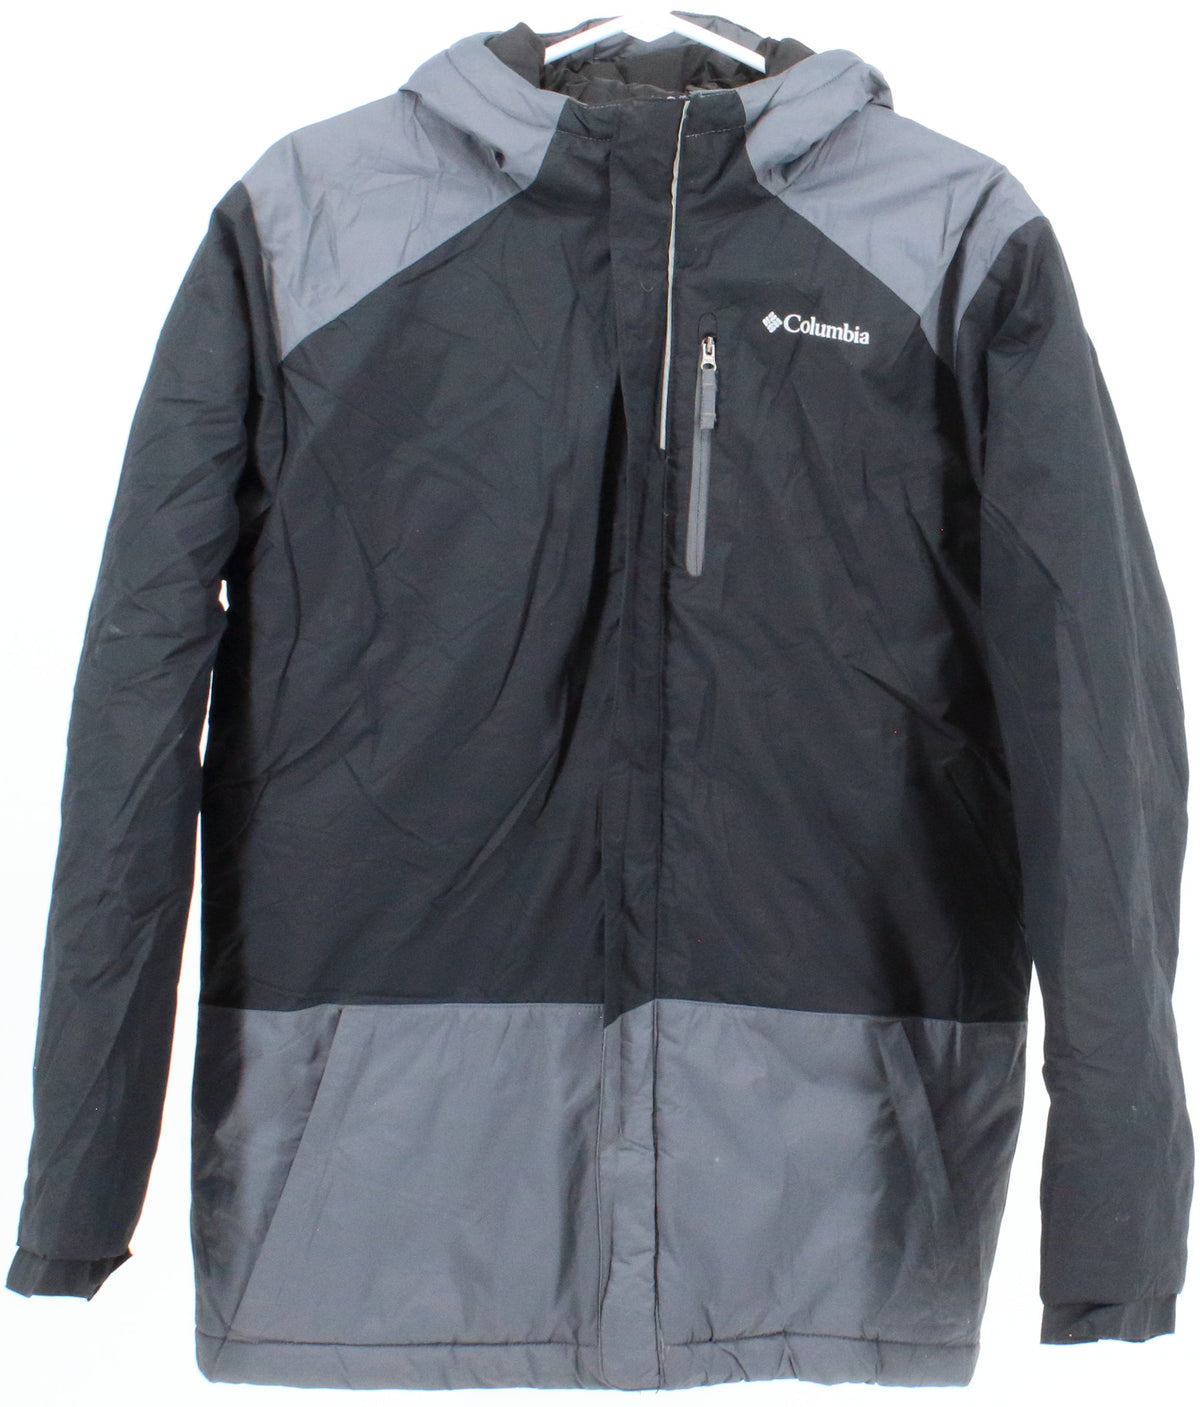 Columbia Black and Grey Insulated Jacket